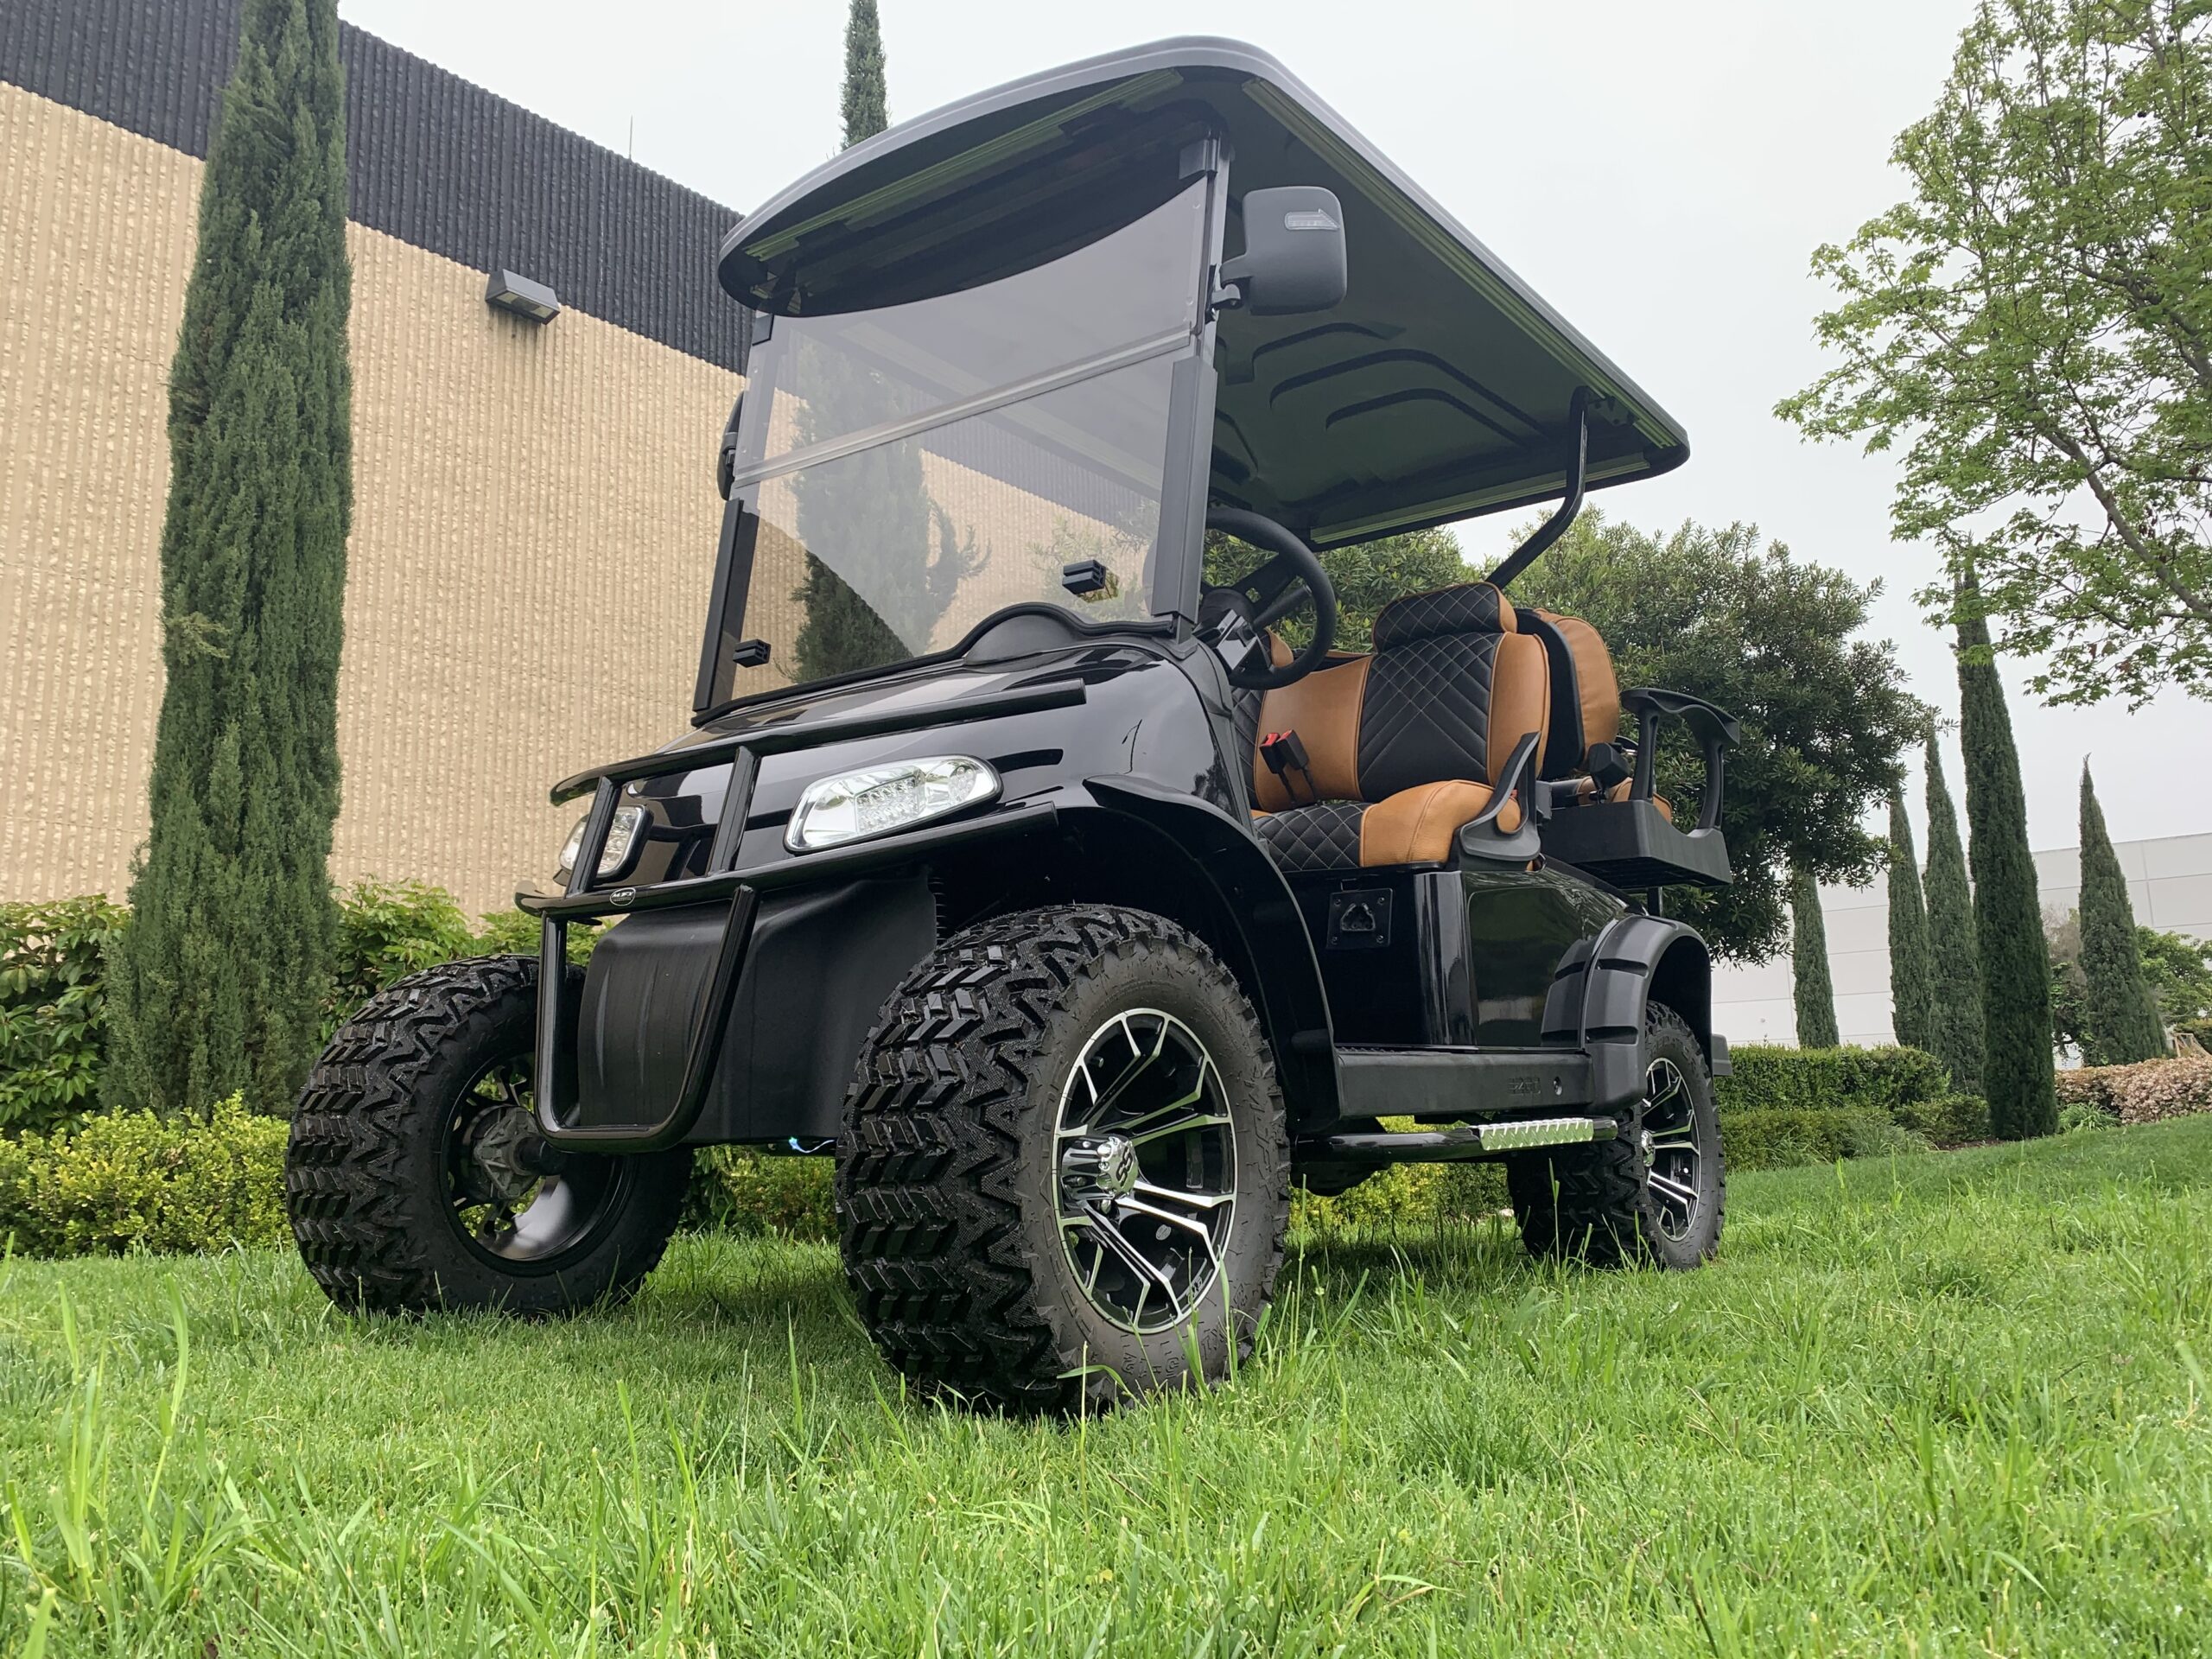 Ezgo Electric Rxv Tricked Out 4 Passenger Golf Cart -Black, #B37